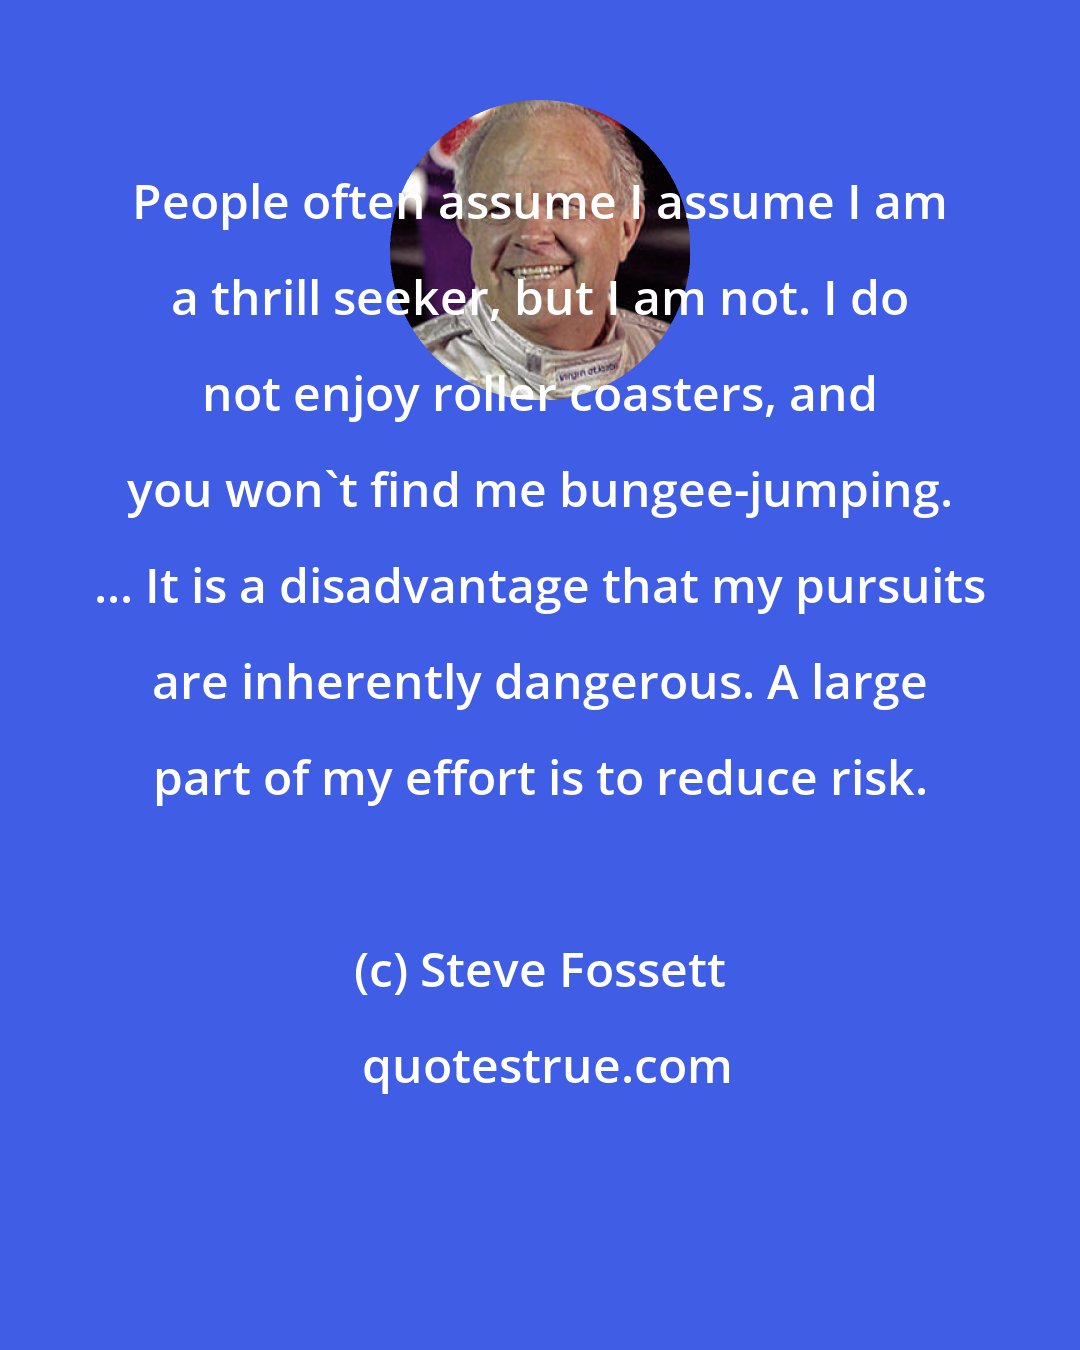 Steve Fossett: People often assume I assume I am a thrill seeker, but I am not. I do not enjoy roller coasters, and you won't find me bungee-jumping. ... It is a disadvantage that my pursuits are inherently dangerous. A large part of my effort is to reduce risk.